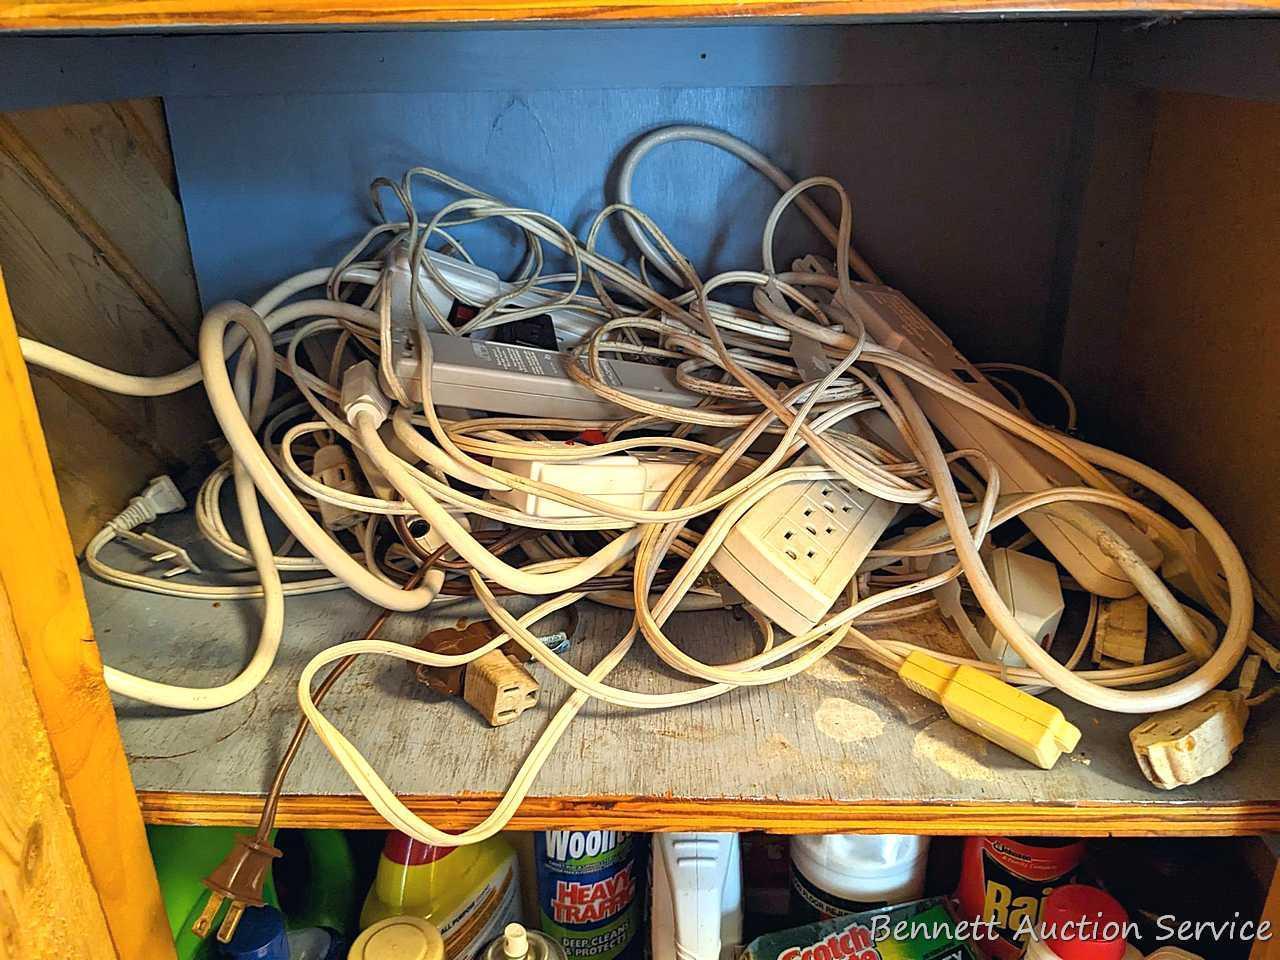 2 shelves of extension cords, power strips, various light bulbs, and more.